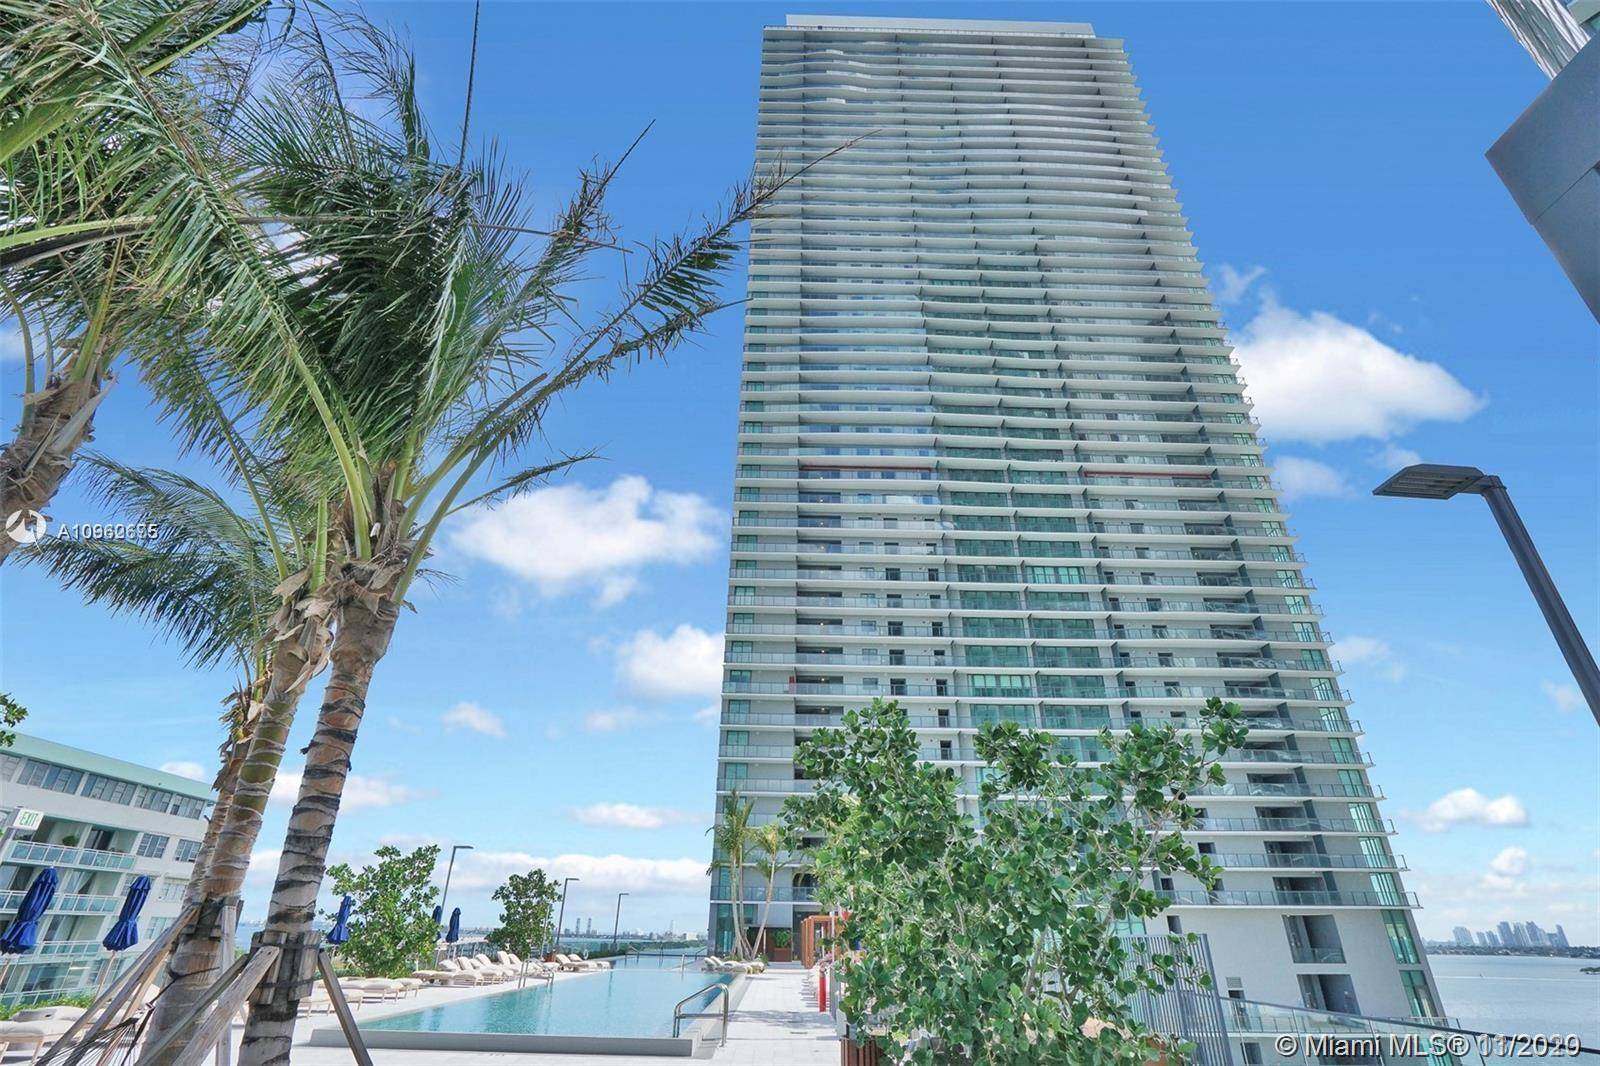 Gorgeous 3 bedroom 3. 5 bath condo in the Heart of Edgewater.